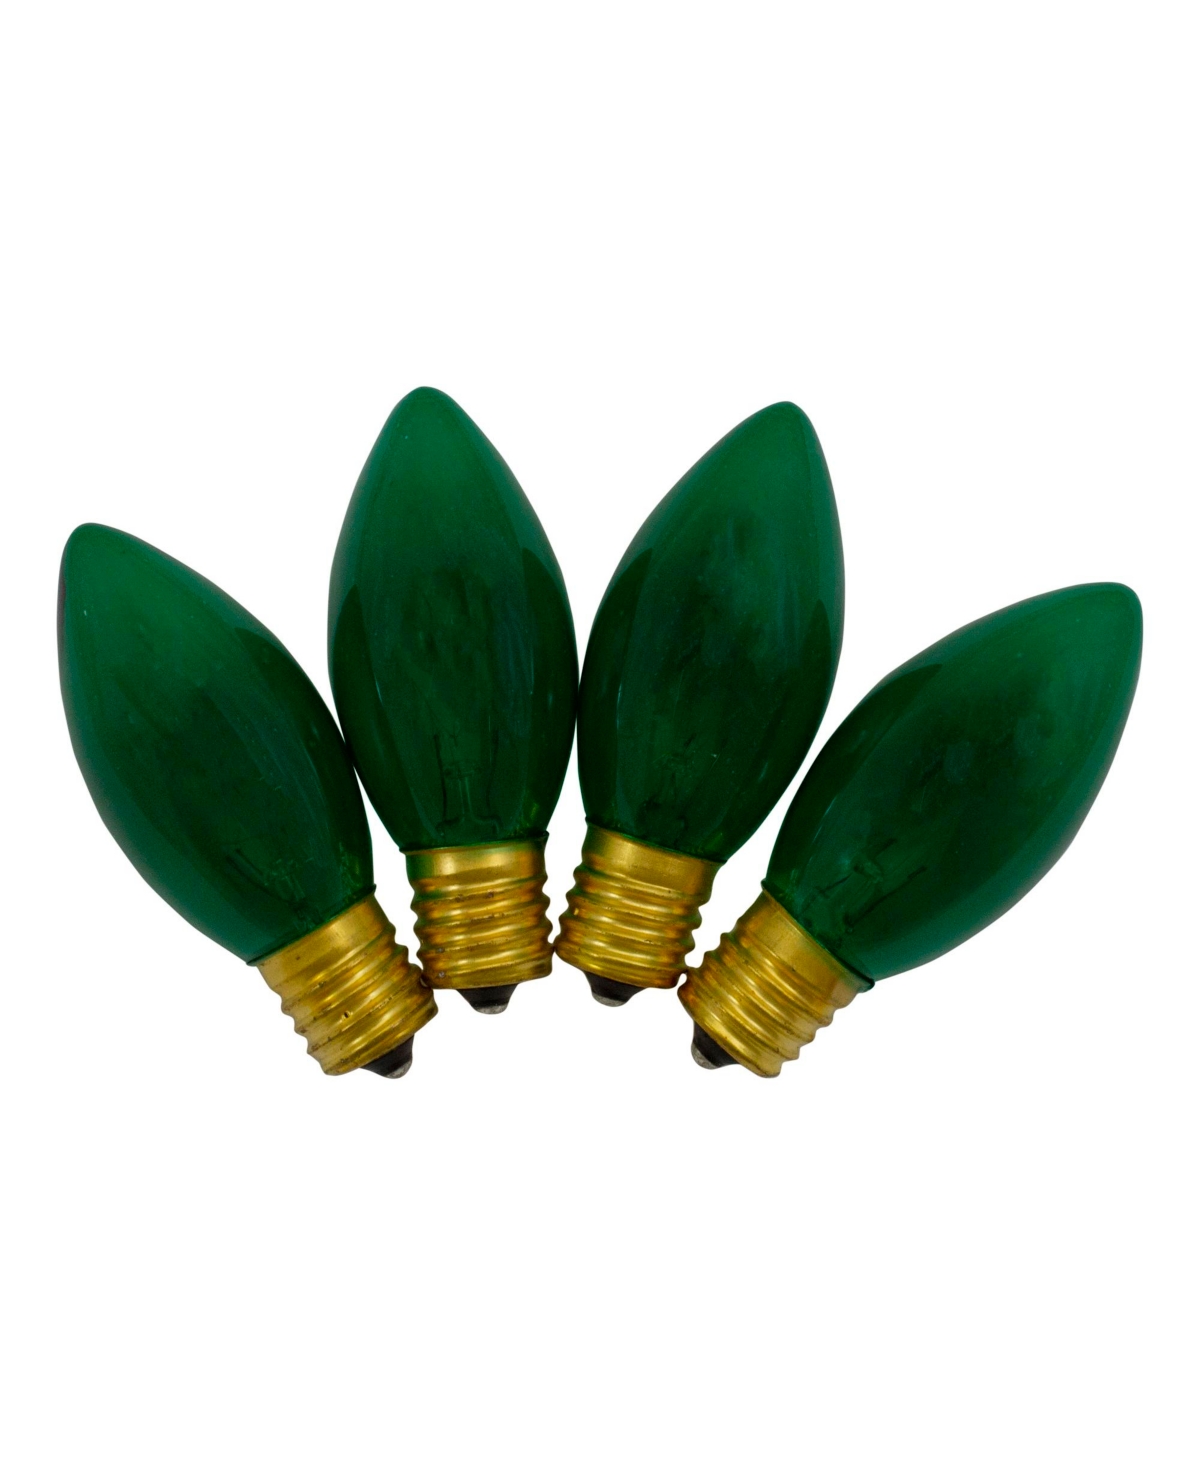 Northlight 3" C9 Transparent Christmas Replacement Bulbs, Set Of 4 In Green